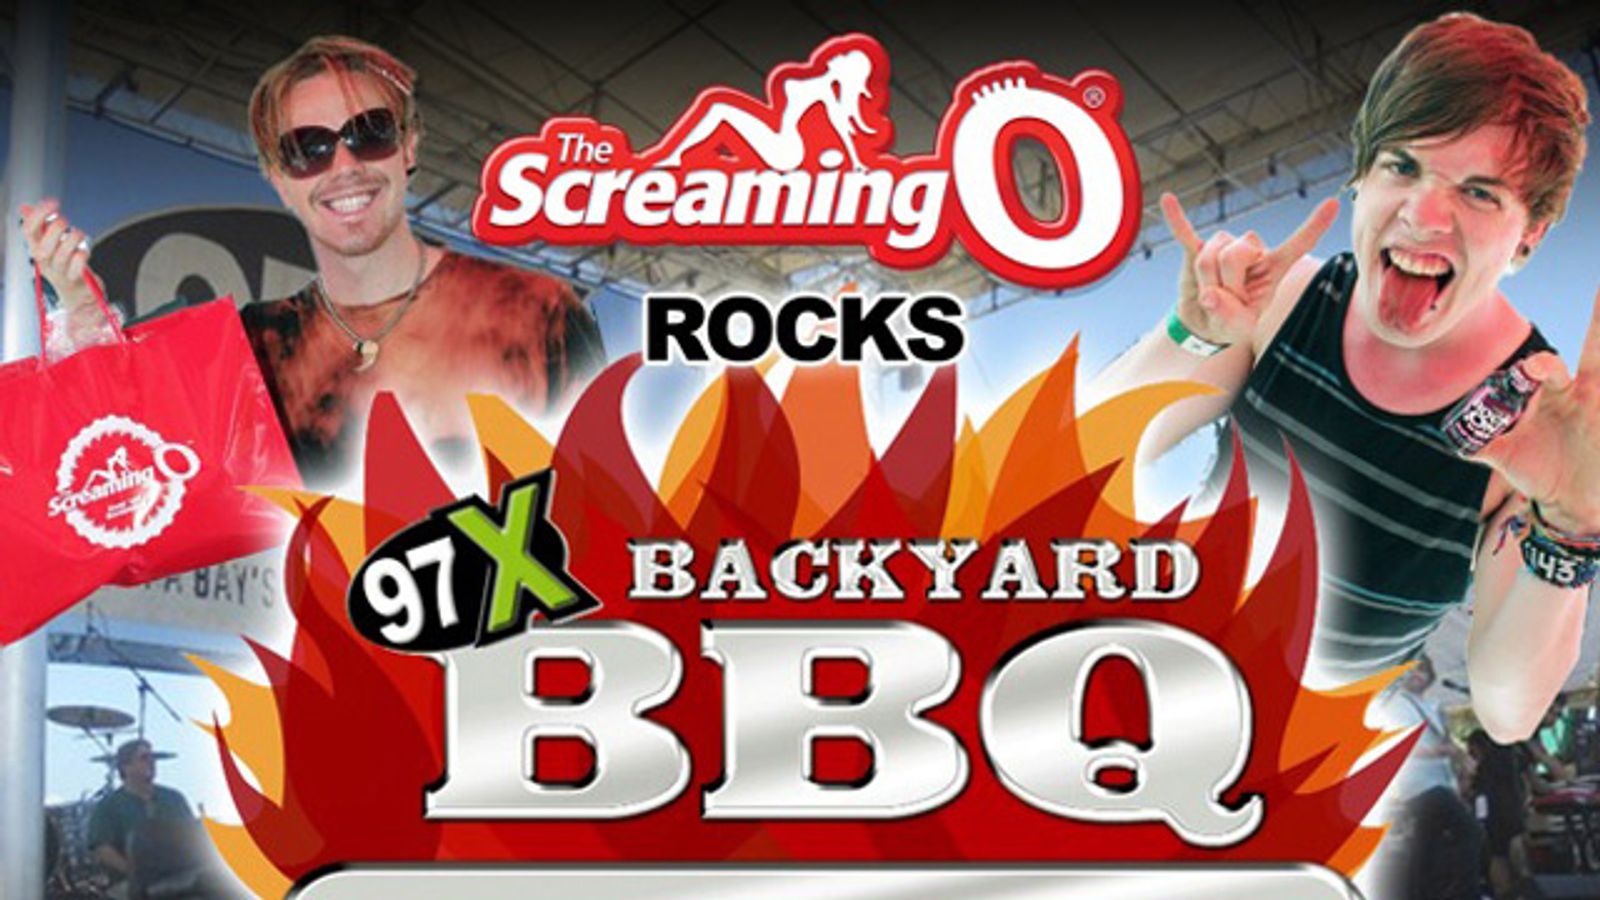 The Screaming O Added Sizzle to Tampa's 97X Backyard BBQ AVN